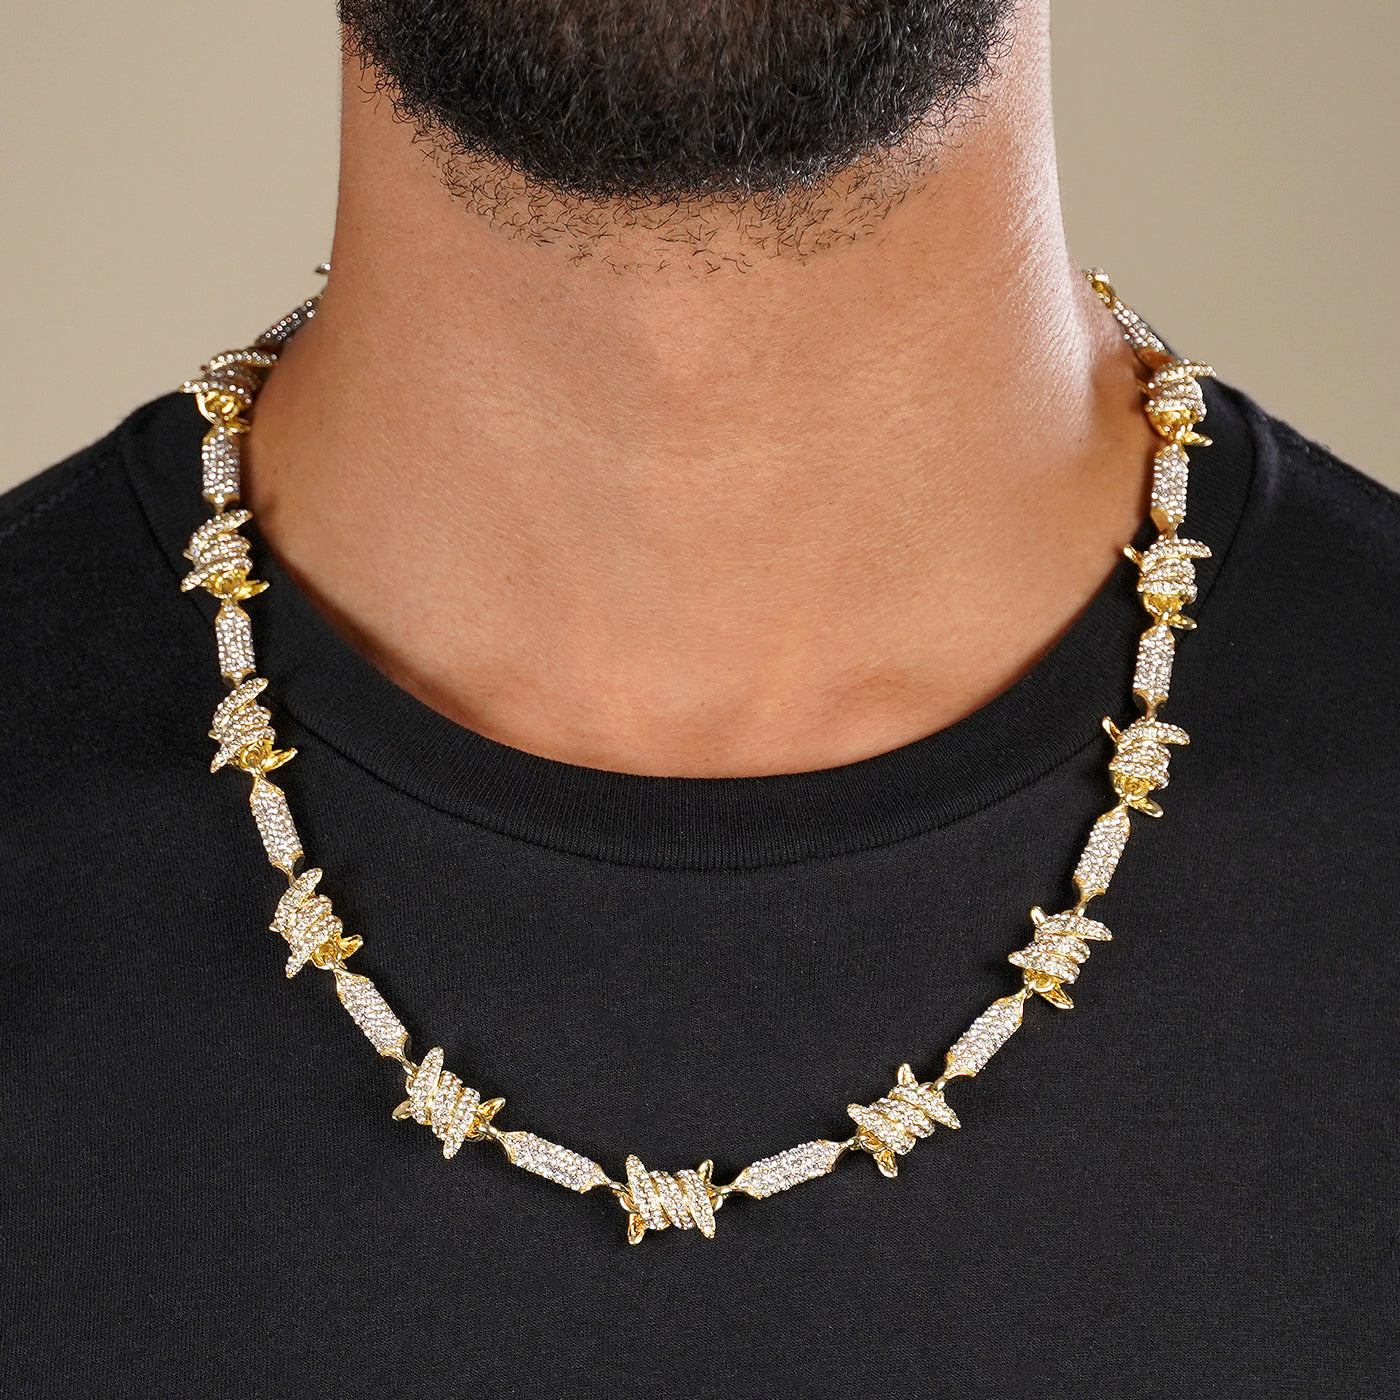 Iced Out Golden Barbed Wire Chain Necklace (24 inches)